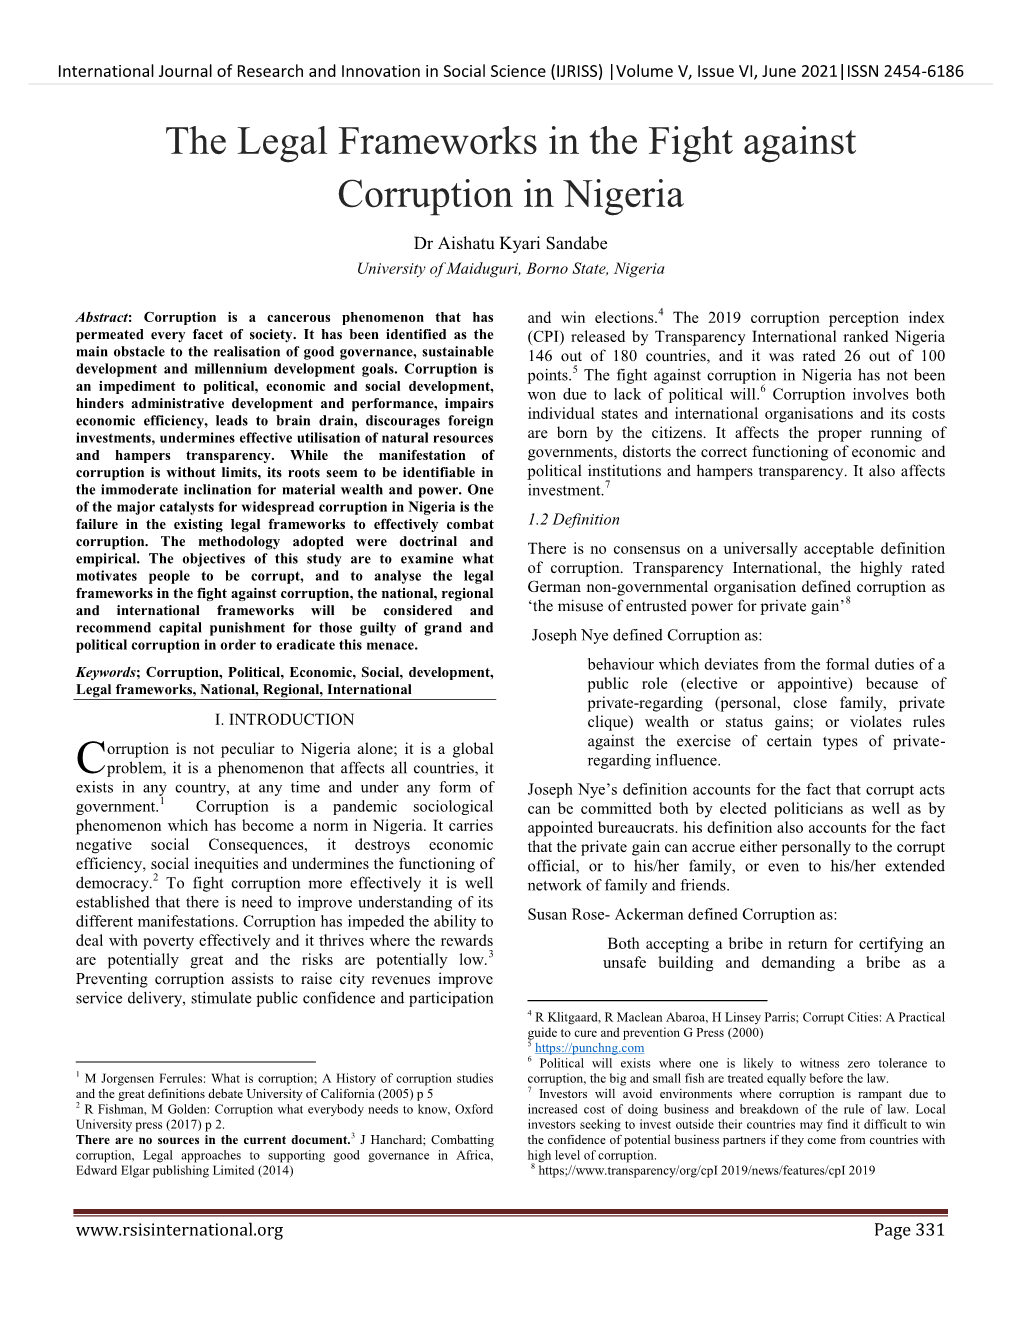 The Legal Frameworks in the Fight Against Corruption in Nigeria